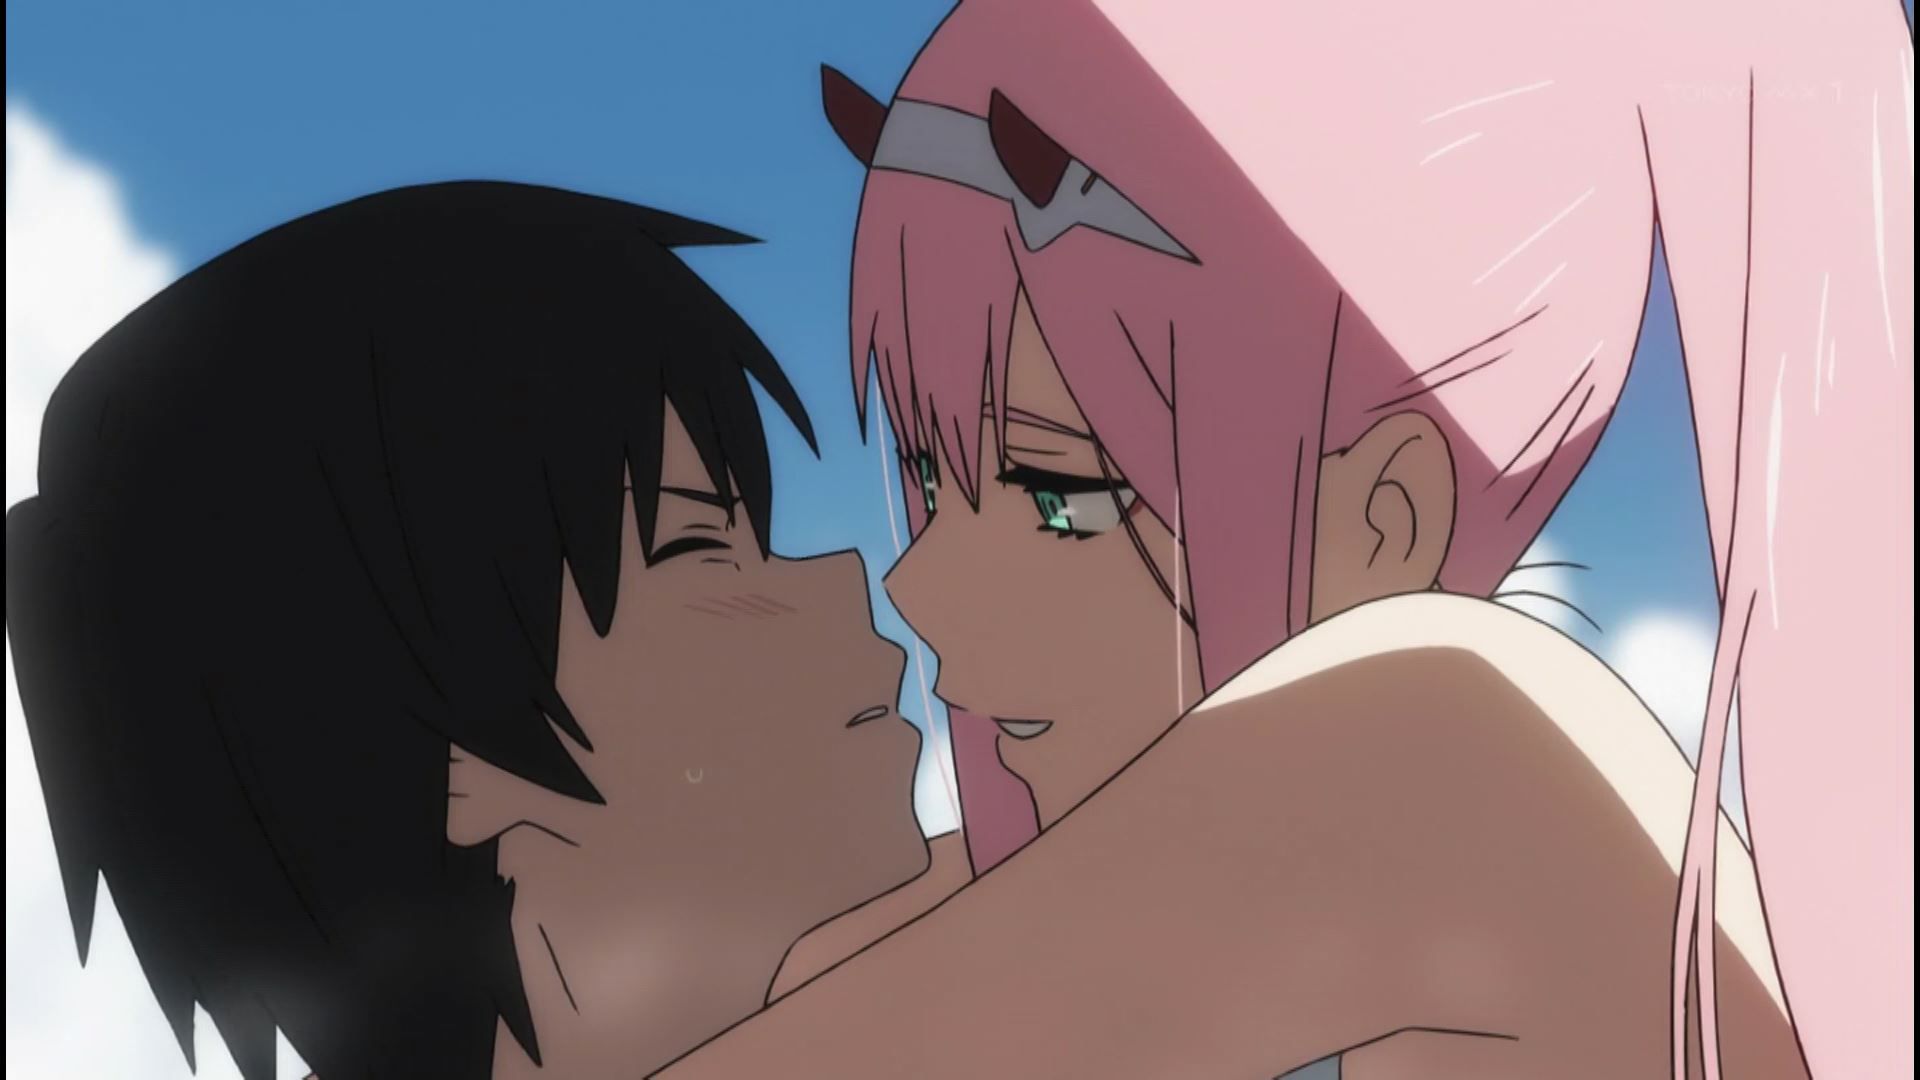 Anime [Darling in the franc kiss] seven girls erotic breasts and buttocks swimsuit times in the story! 15